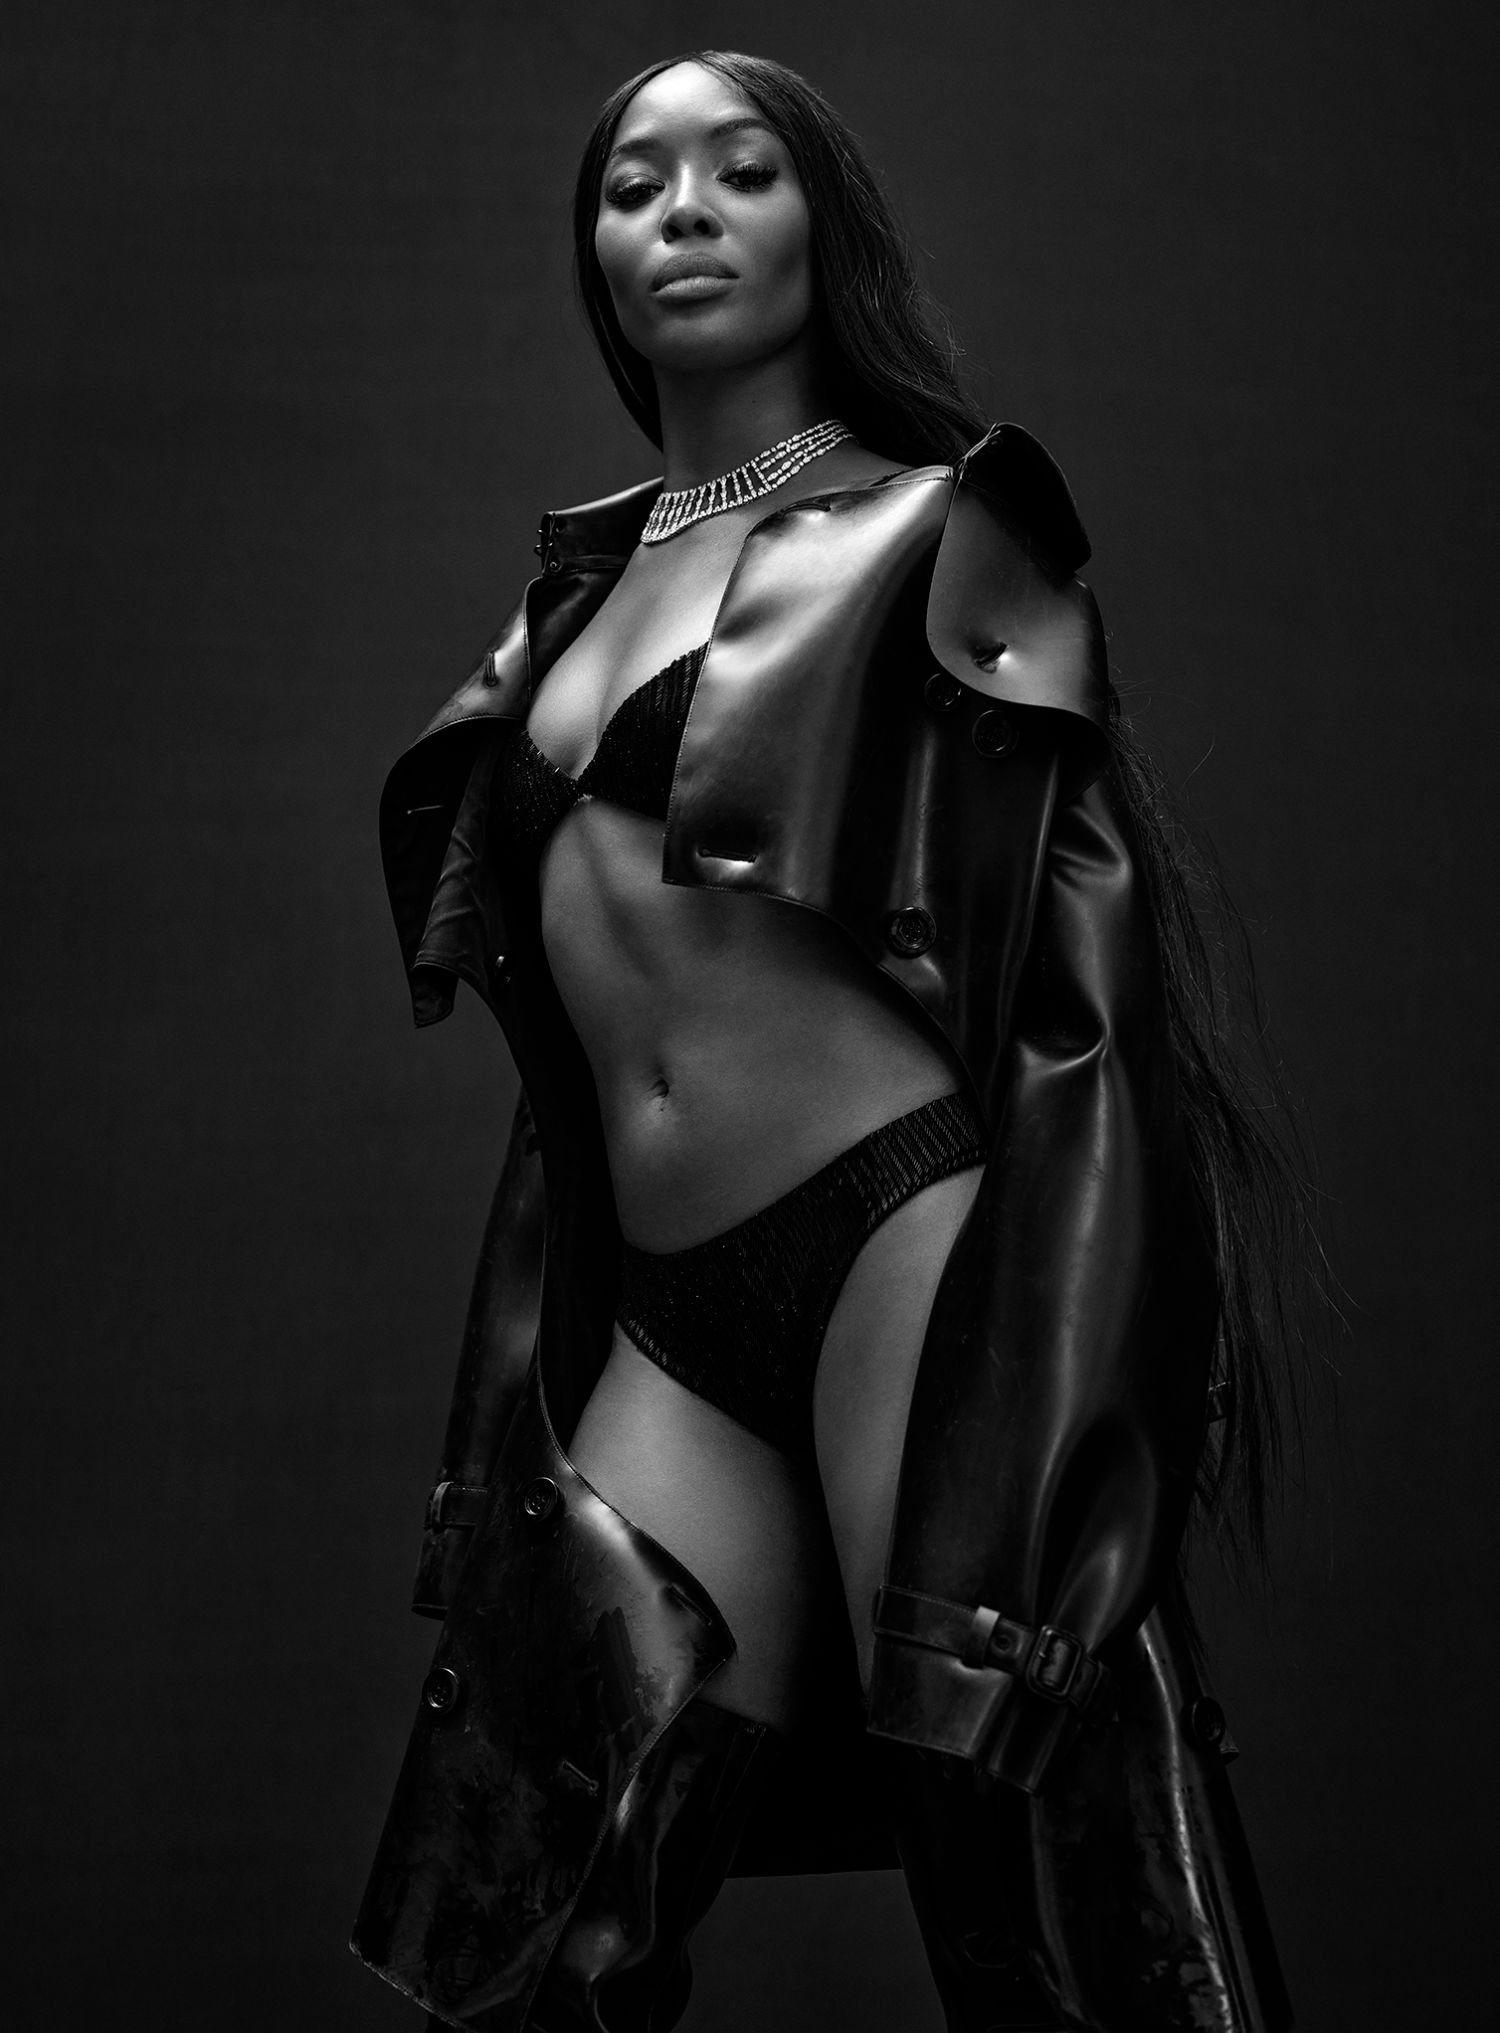 Supernova Summer: Naomi Campbell by Mario Sorrenti for V Magazine Summer 2021. Clothing & Jewelry: Coat, Boots by Burberry; Bikini by Tom Ford; Necklace by Cartier